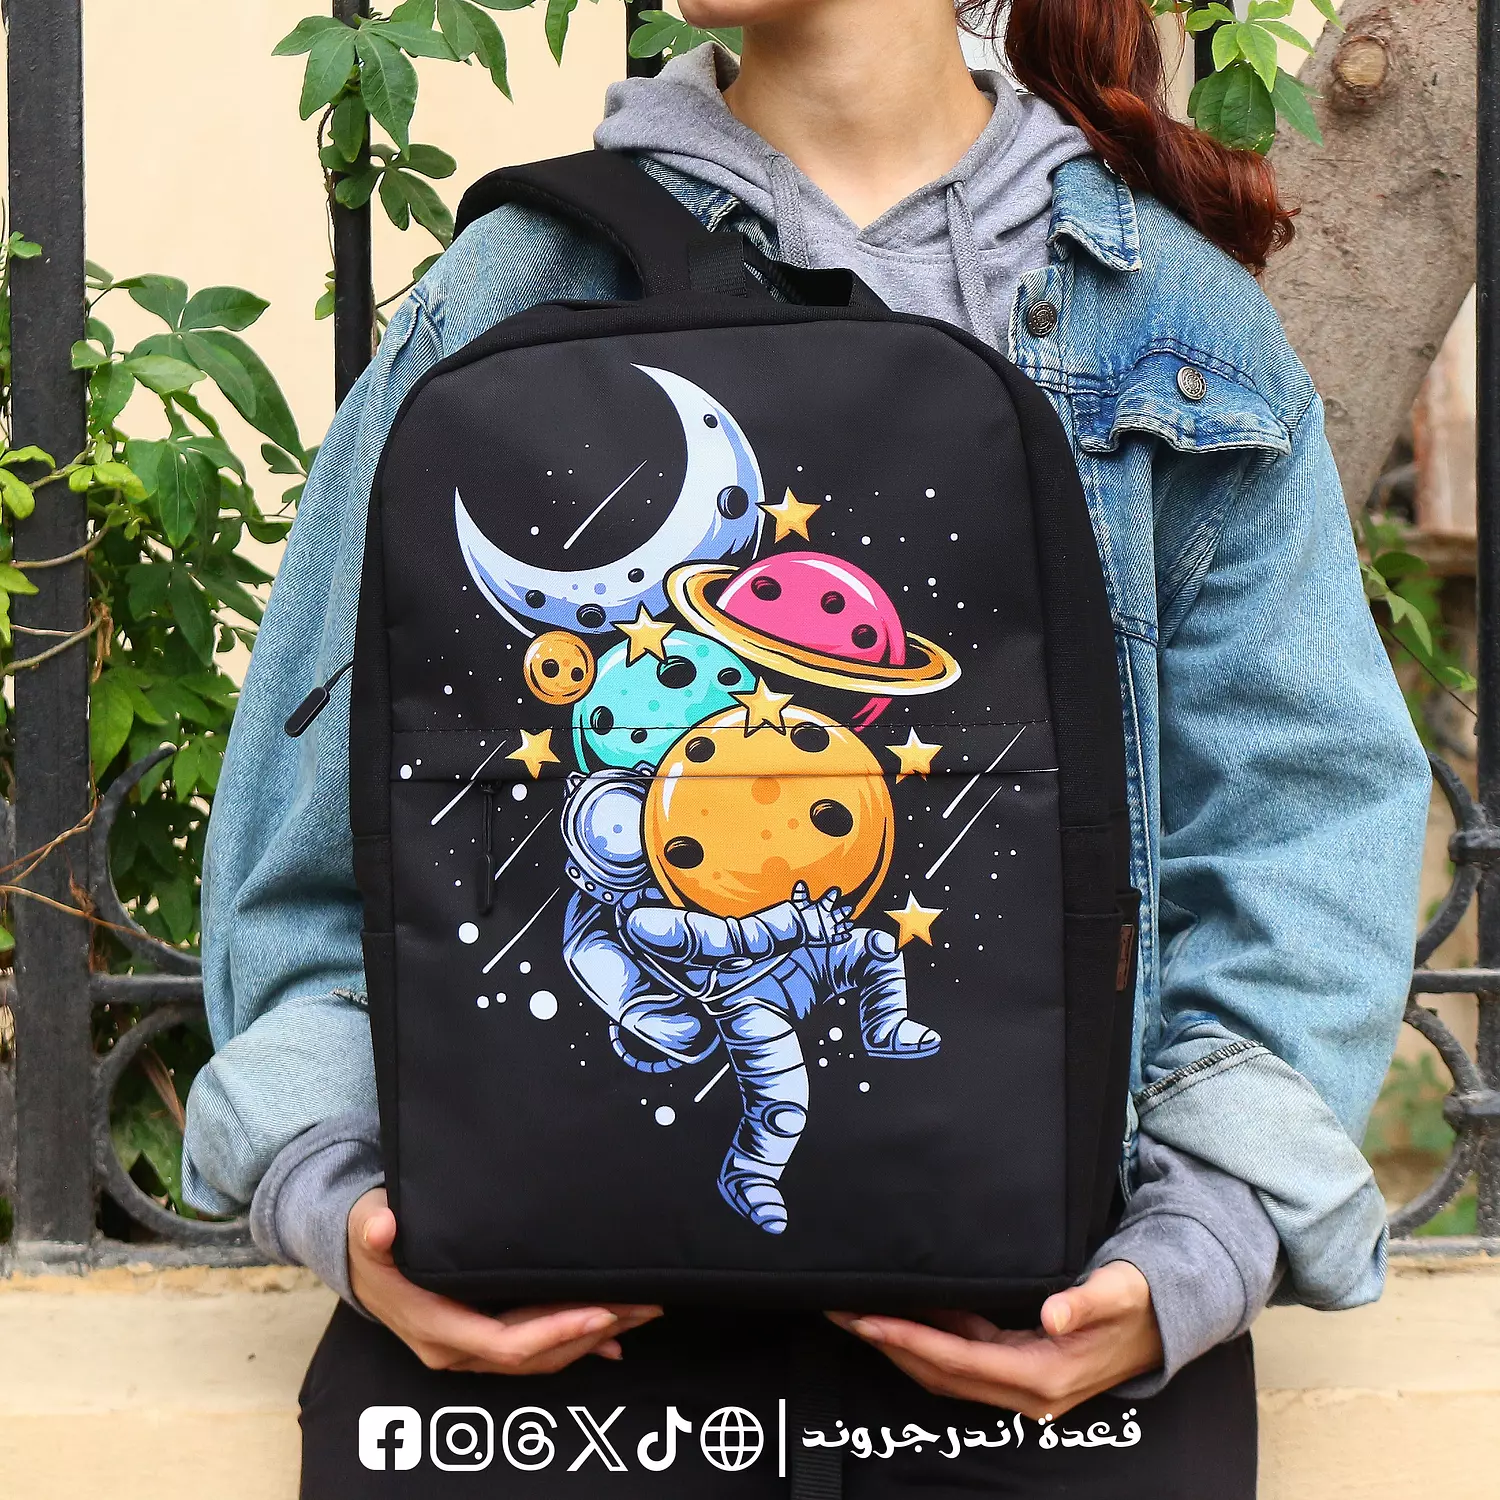 Astronaut Backpack 🎒 hover image